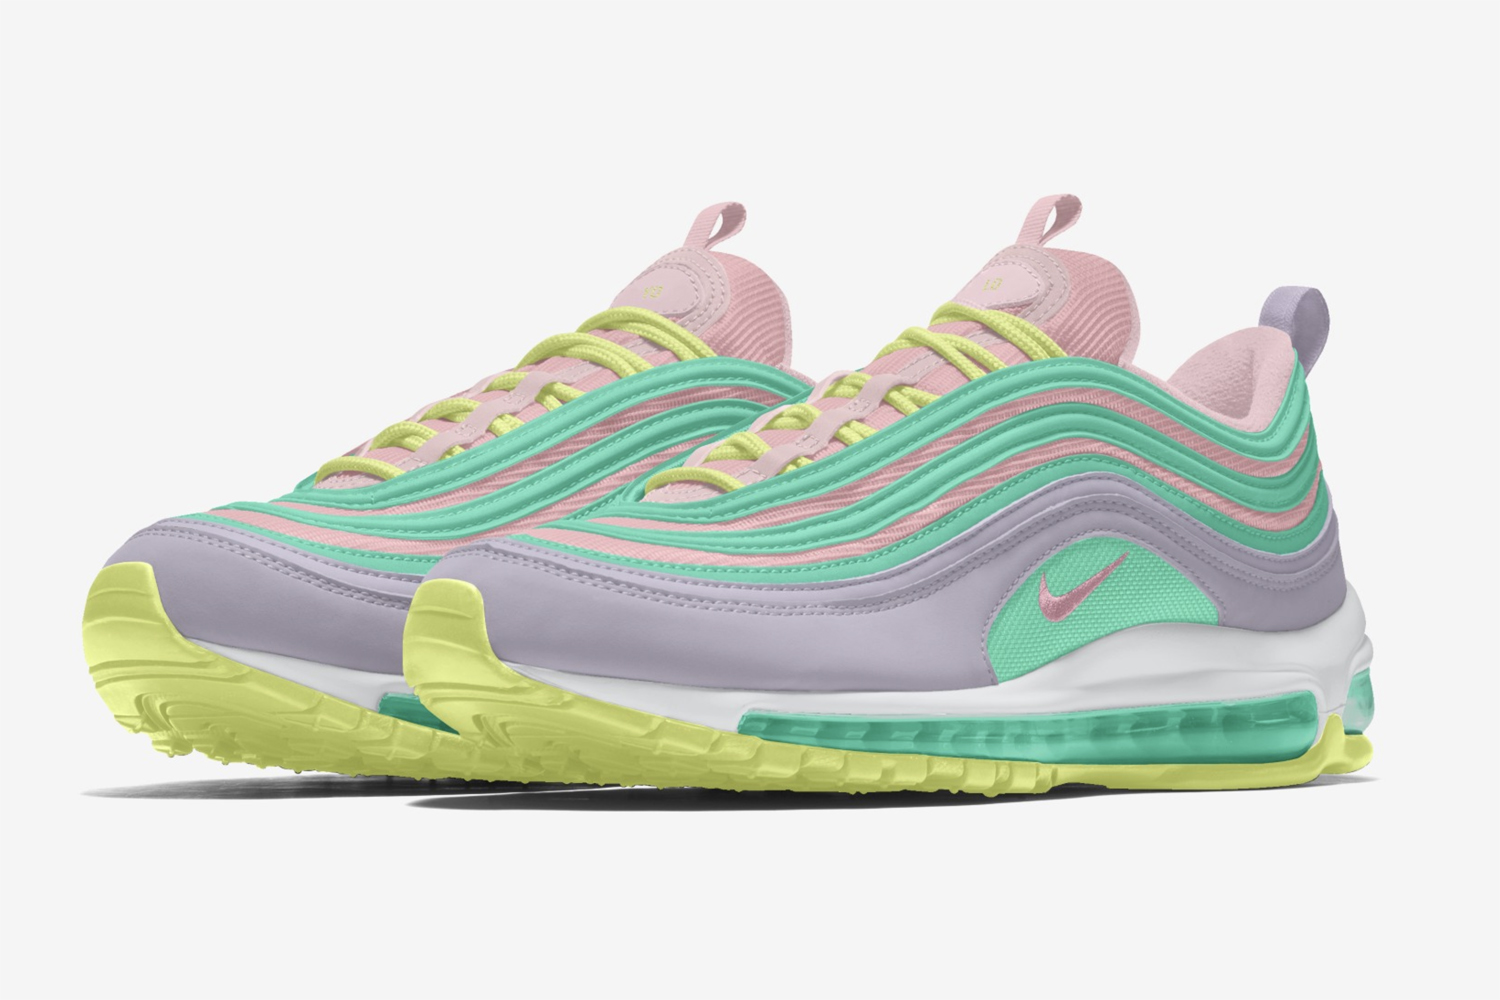 Nike By You Air Max 97 shoe design